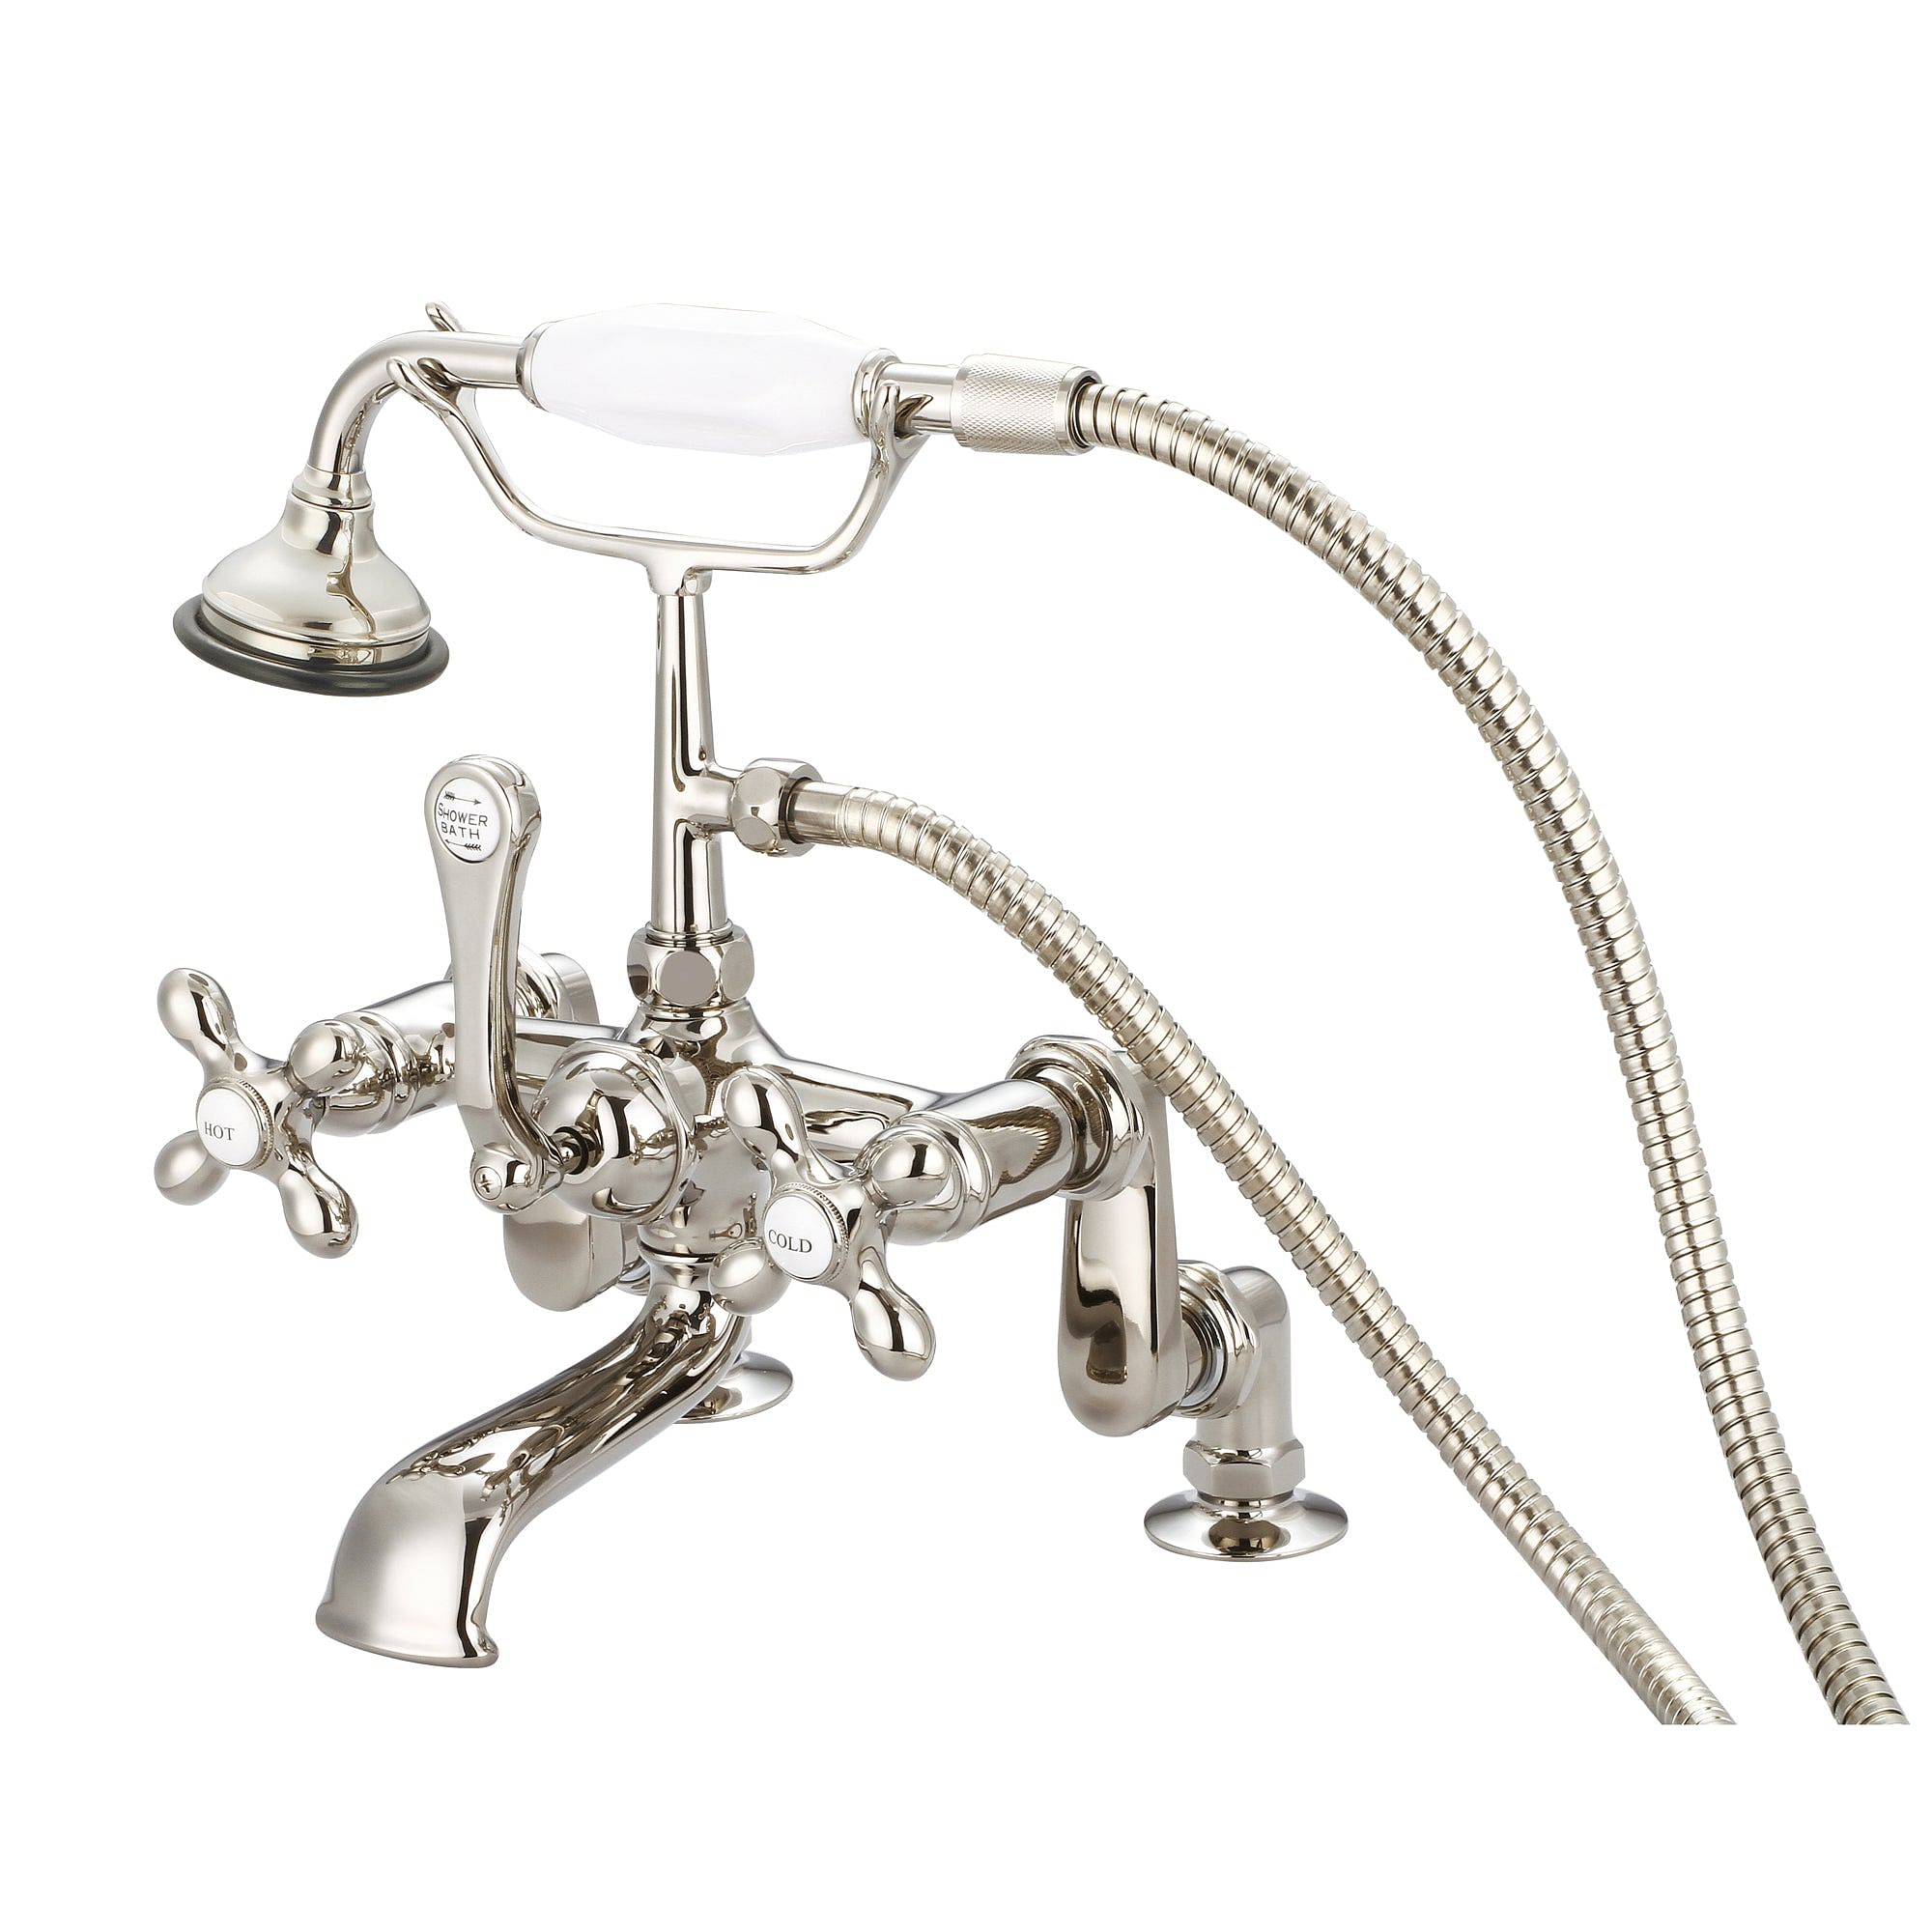 Vintage Classic Adjustable Center Deck Mount Tub Faucet With Handheld Shower in Polished Nickel (PVD) Finish With Metal Lever Handles, Hot And Cold Labels Included